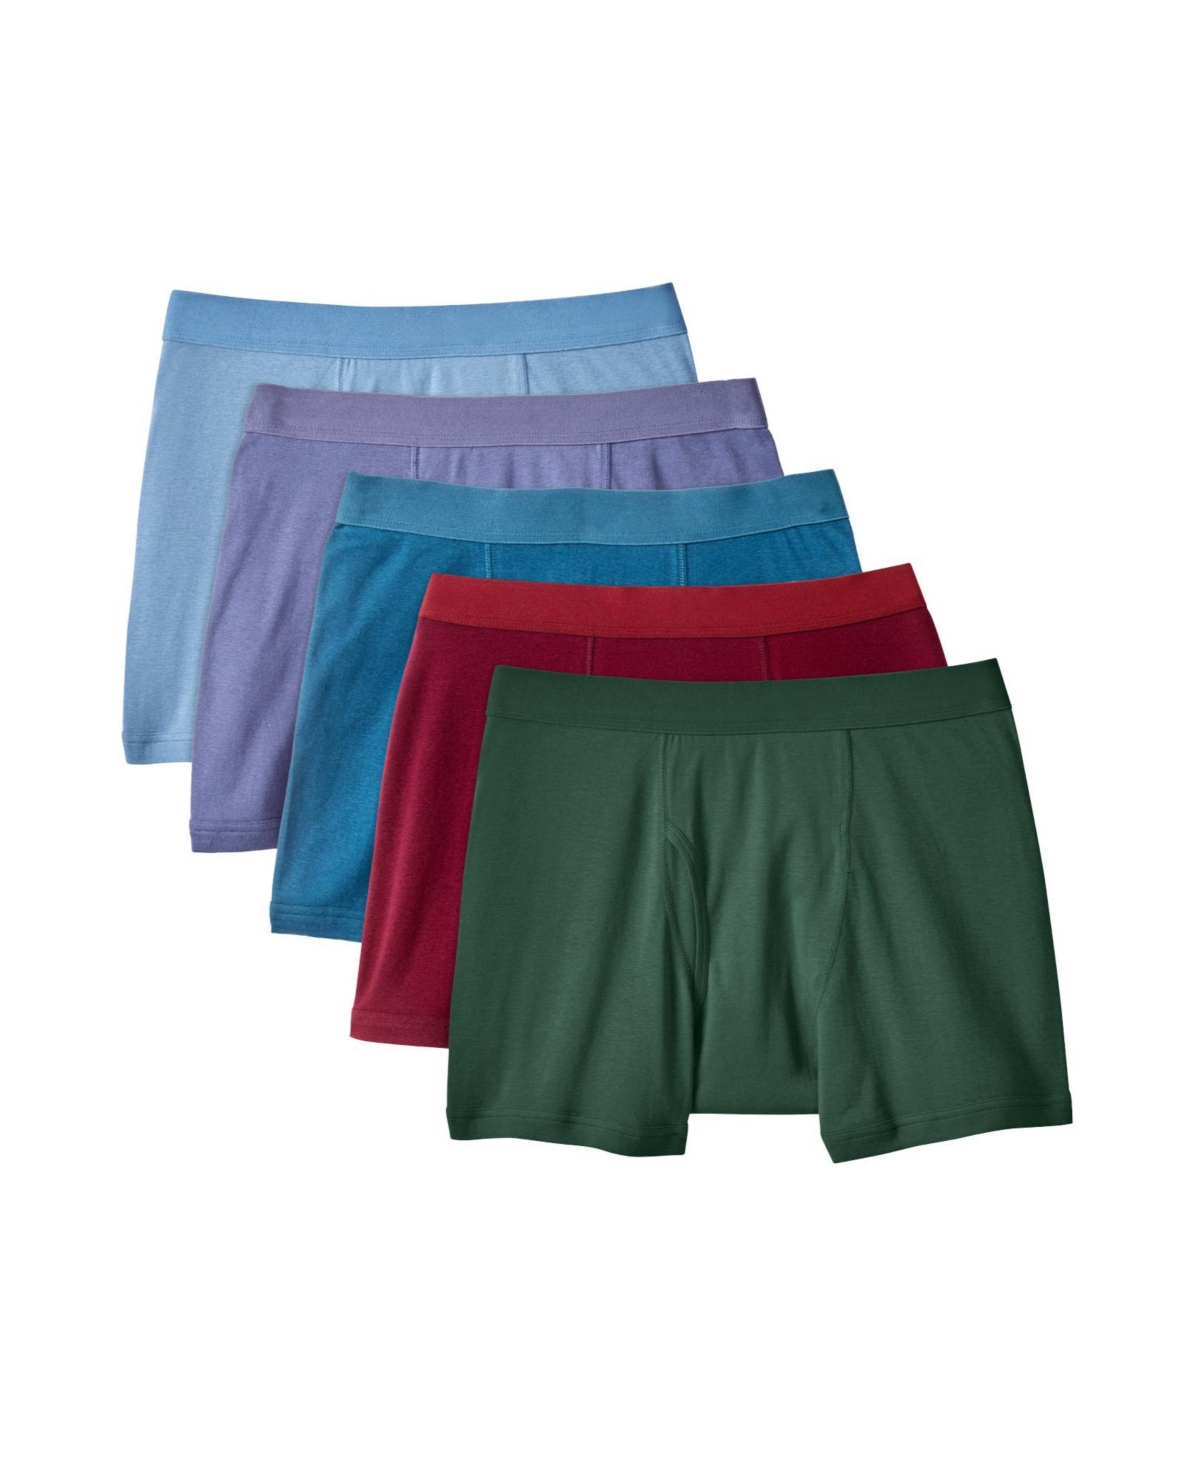 Big & Tall Cotton Boxer Briefs 5-Pack - Assorted colors